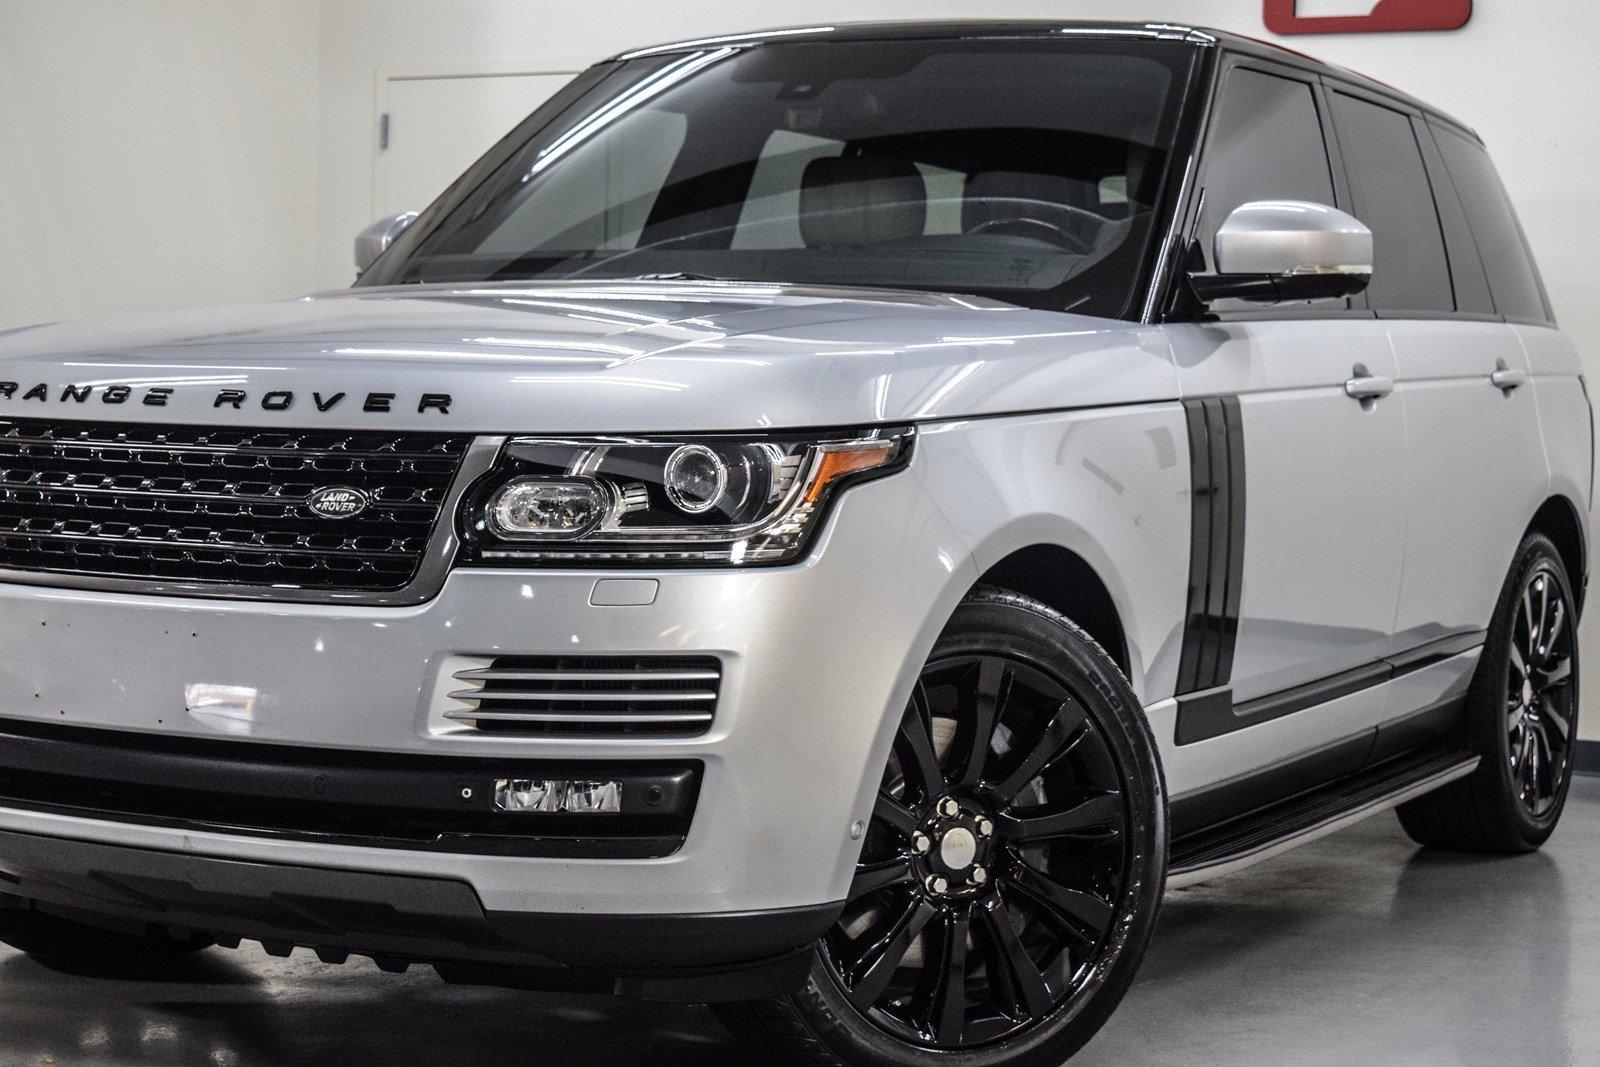 Used 2014 Land Rover Range Rover Supercharged for sale Sold at Gravity Autos Marietta in Marietta GA 30060 30